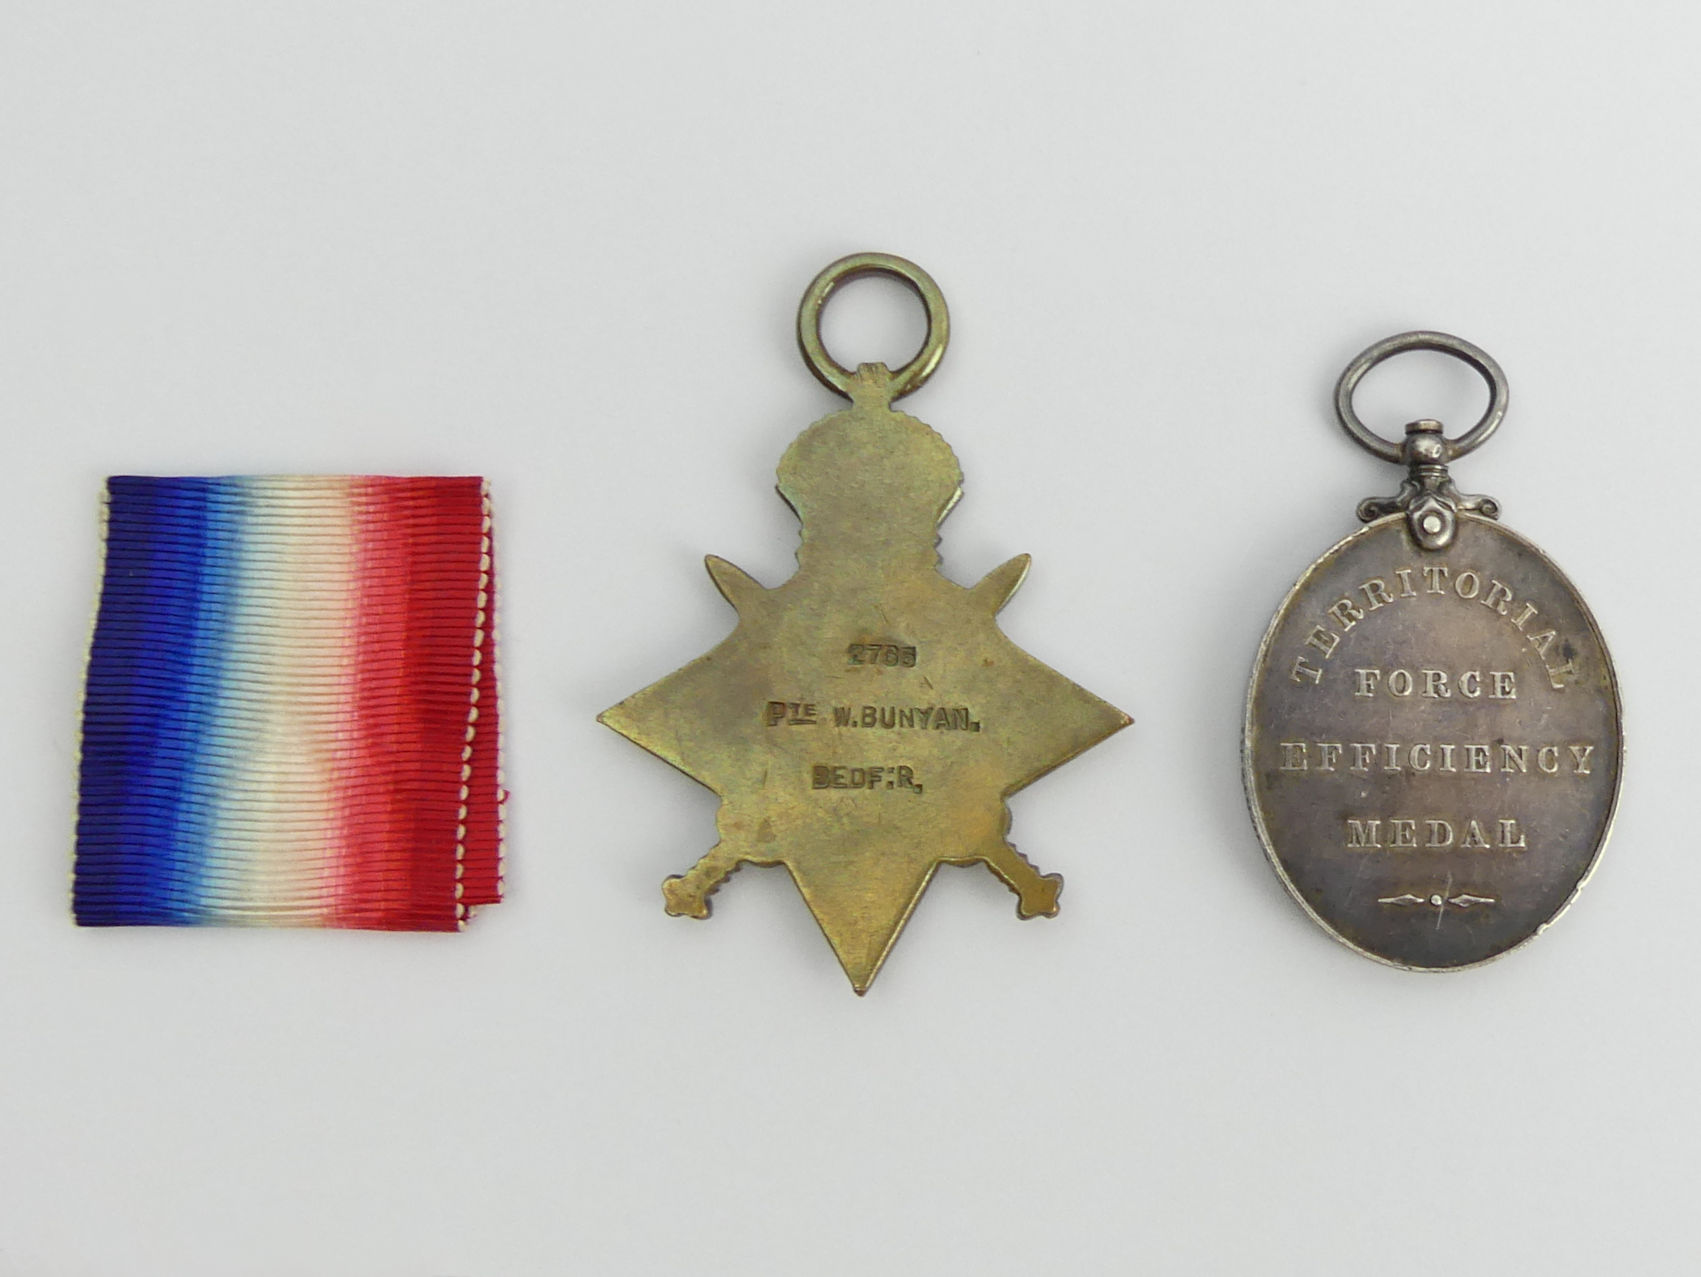 World War I star 2765 Pte Bunyan and efficiency medal to 200040 Pte W Bunyan S/Bedf:& Herts R. - Image 2 of 4